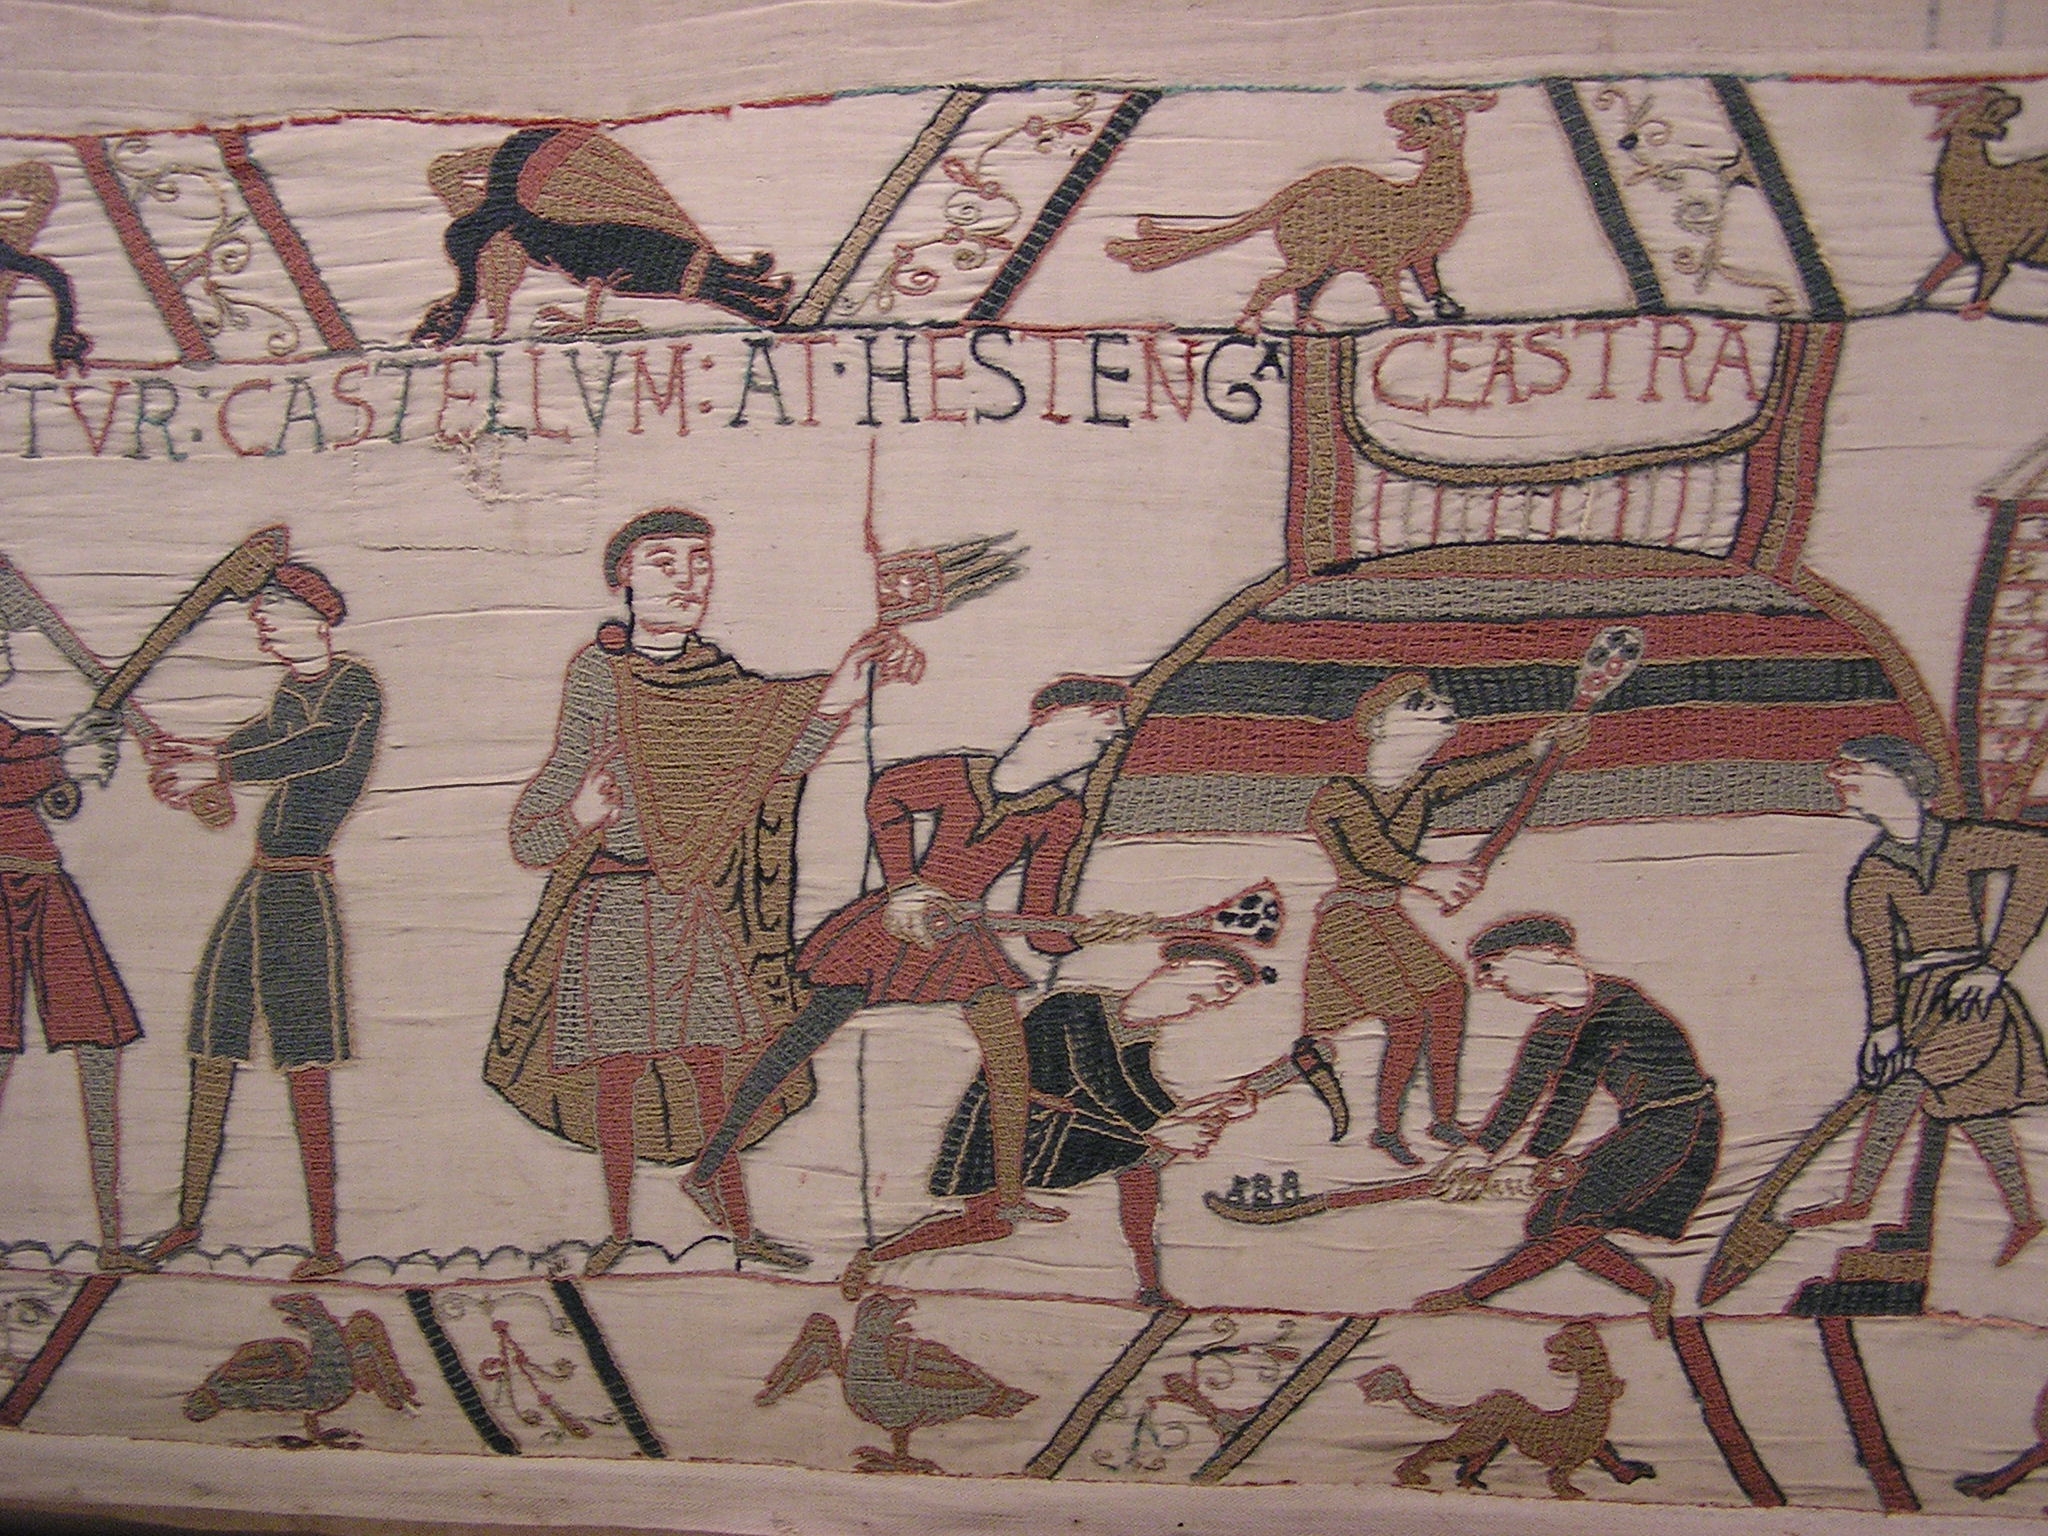 hastings-castle-in-bayeux-tapestry.jpg